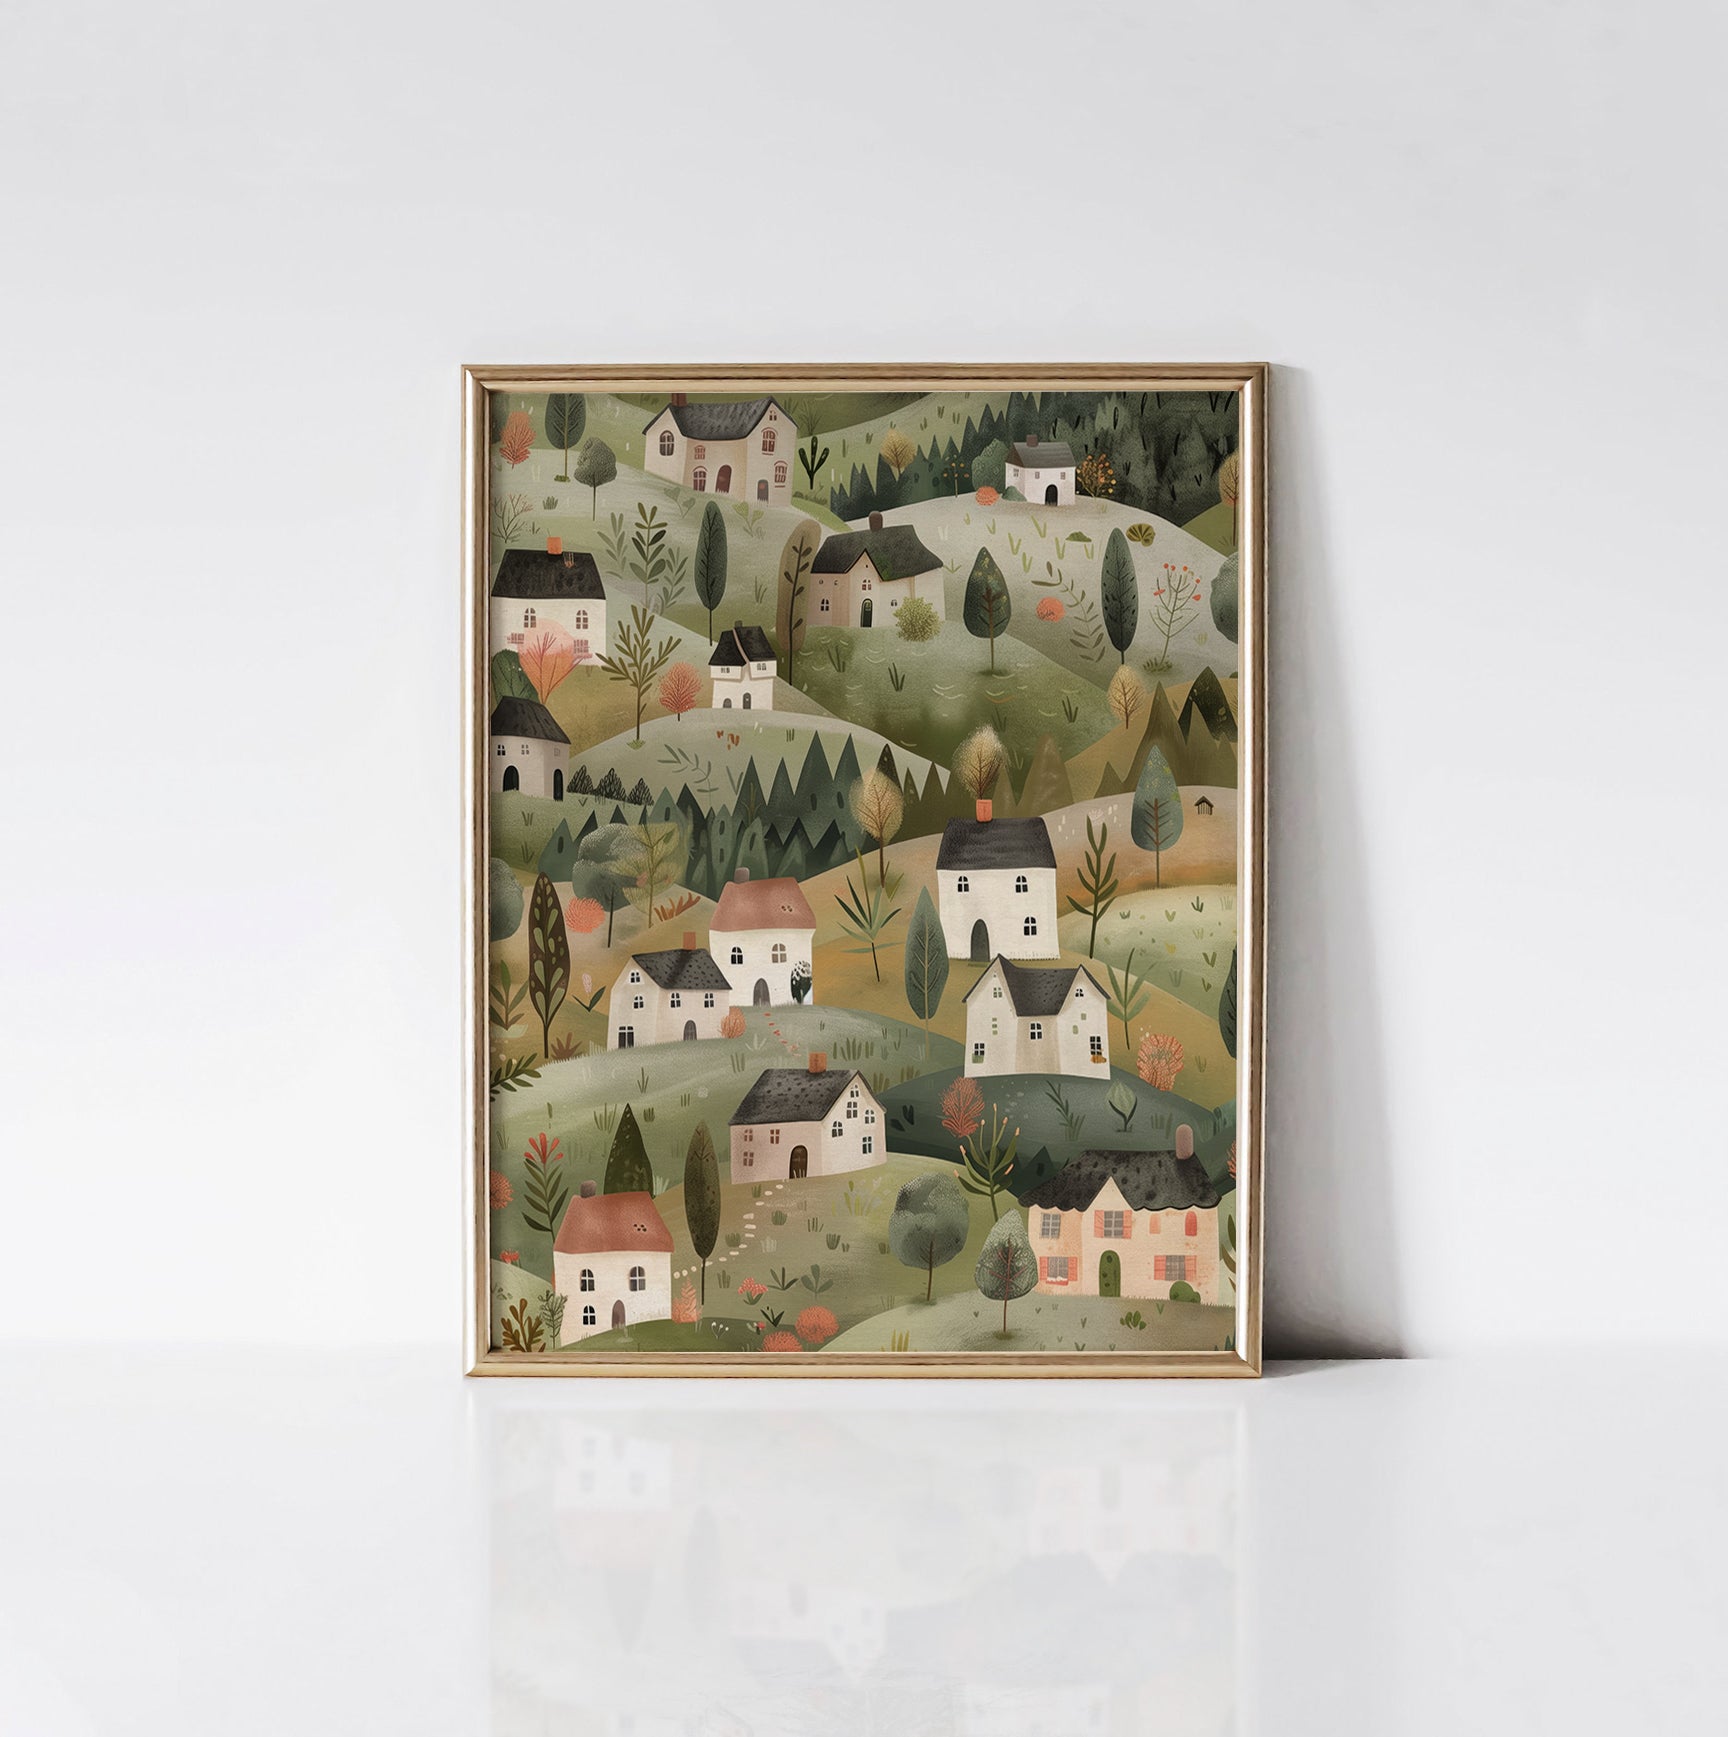 The "Enchanted Village" art print displayed in a gold frame, featuring an idyllic countryside landscape with picturesque cottages, vibrant trees, and gentle hills.